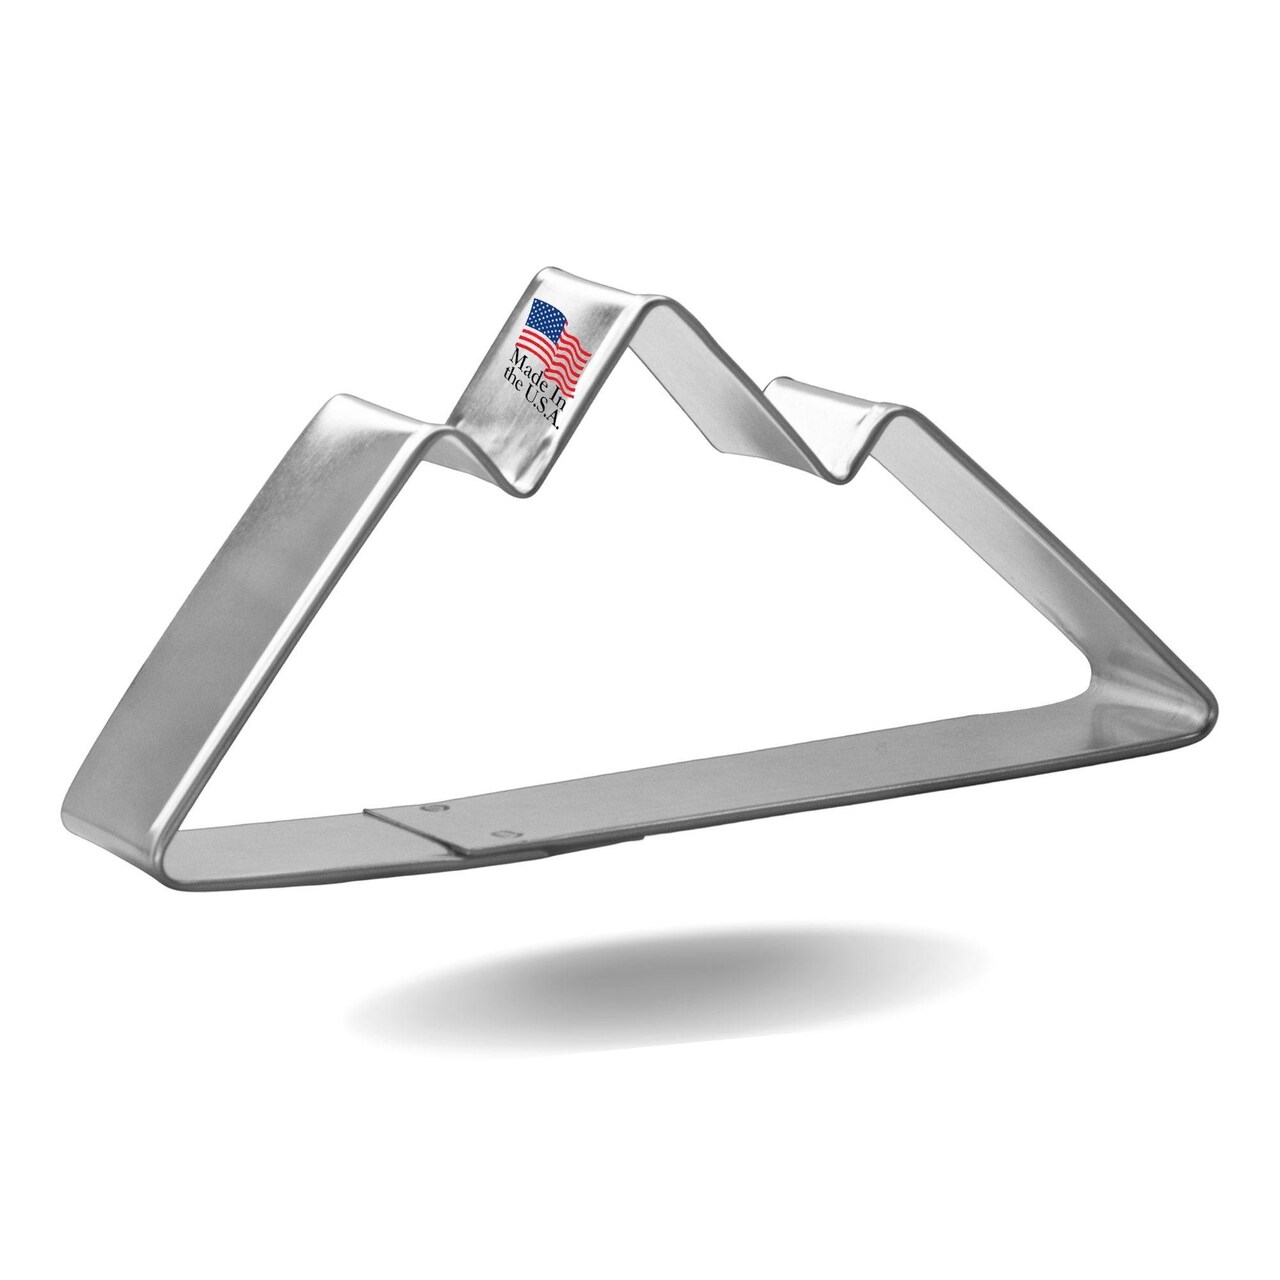 Mountain Cookie Cutter 4.5 in, CookieCutter.com, Tin Plated Steel, Handmade in the USA